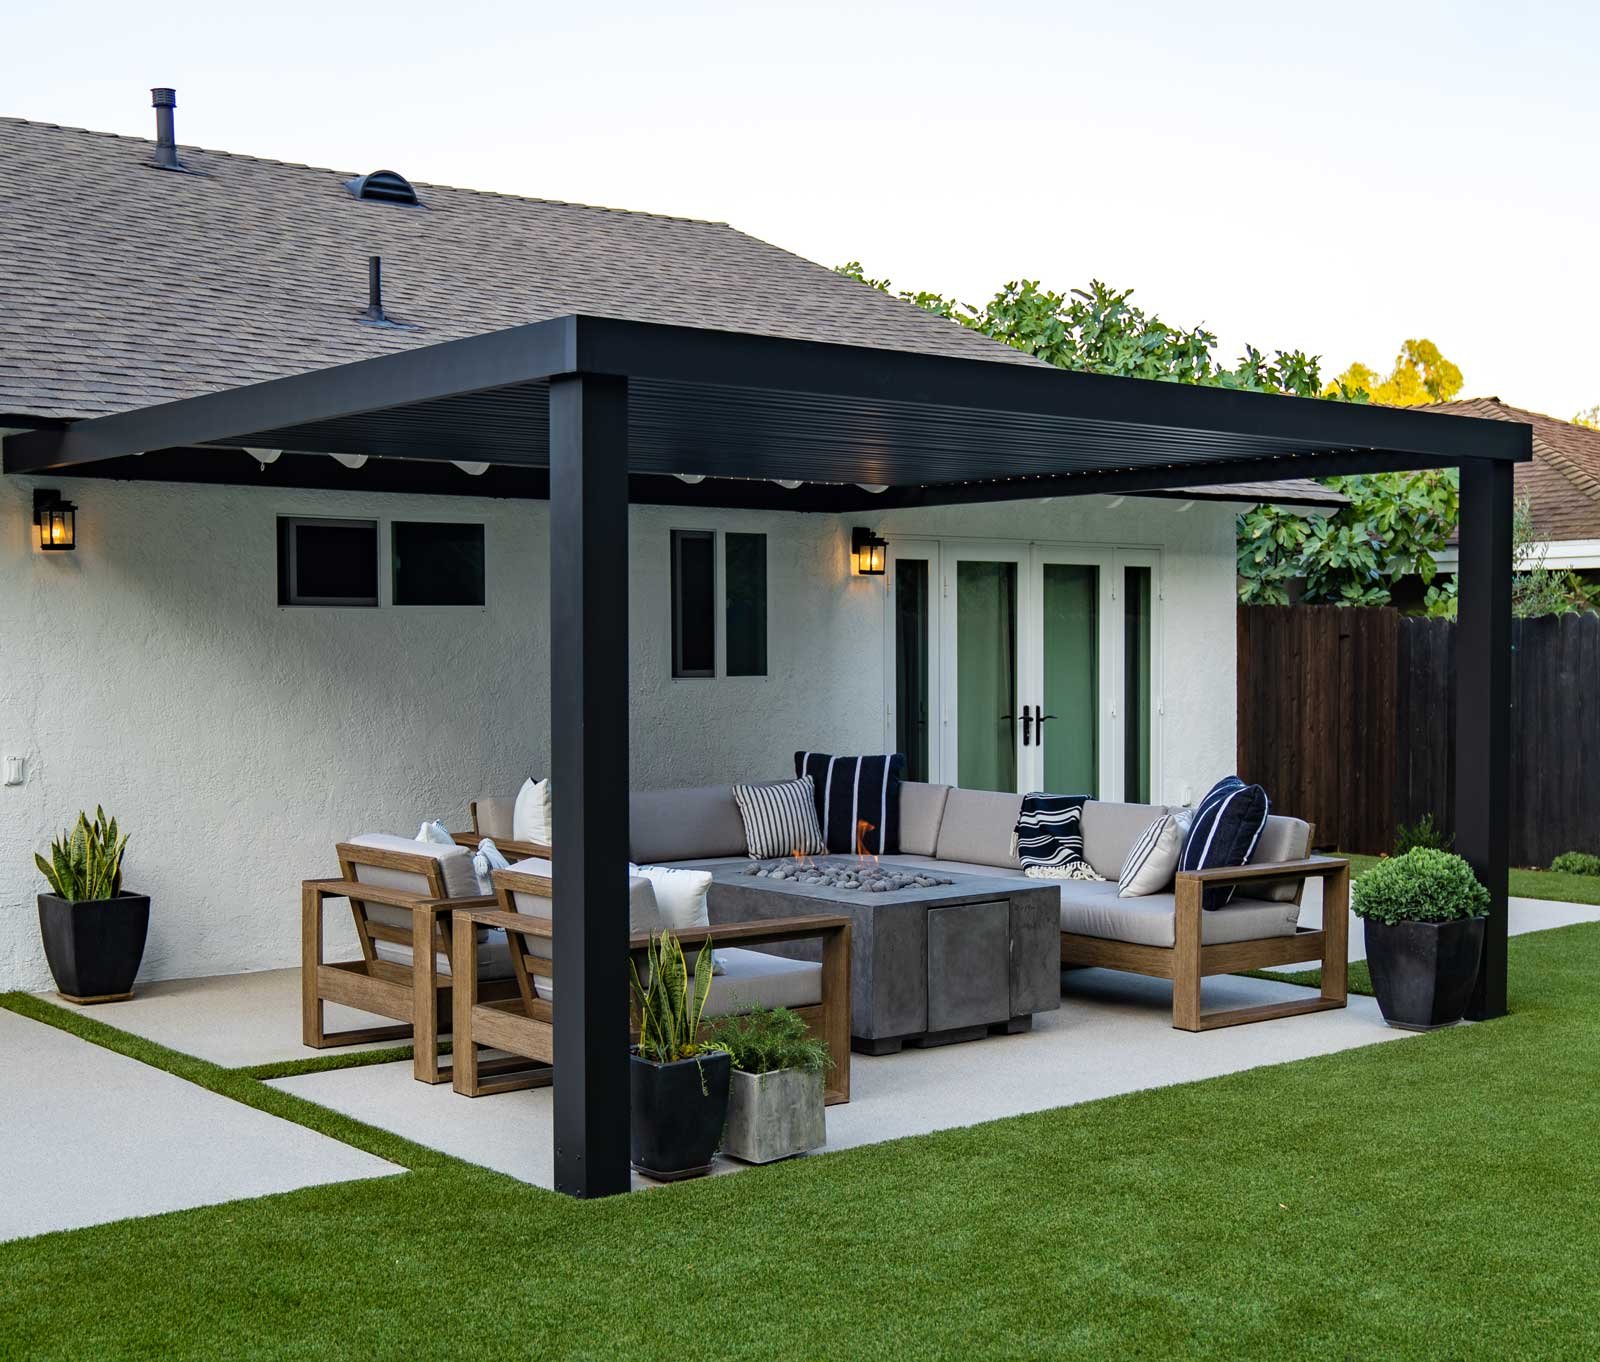 Pergola over an outdoor sitting area with fire pit and lawn surrounding it.